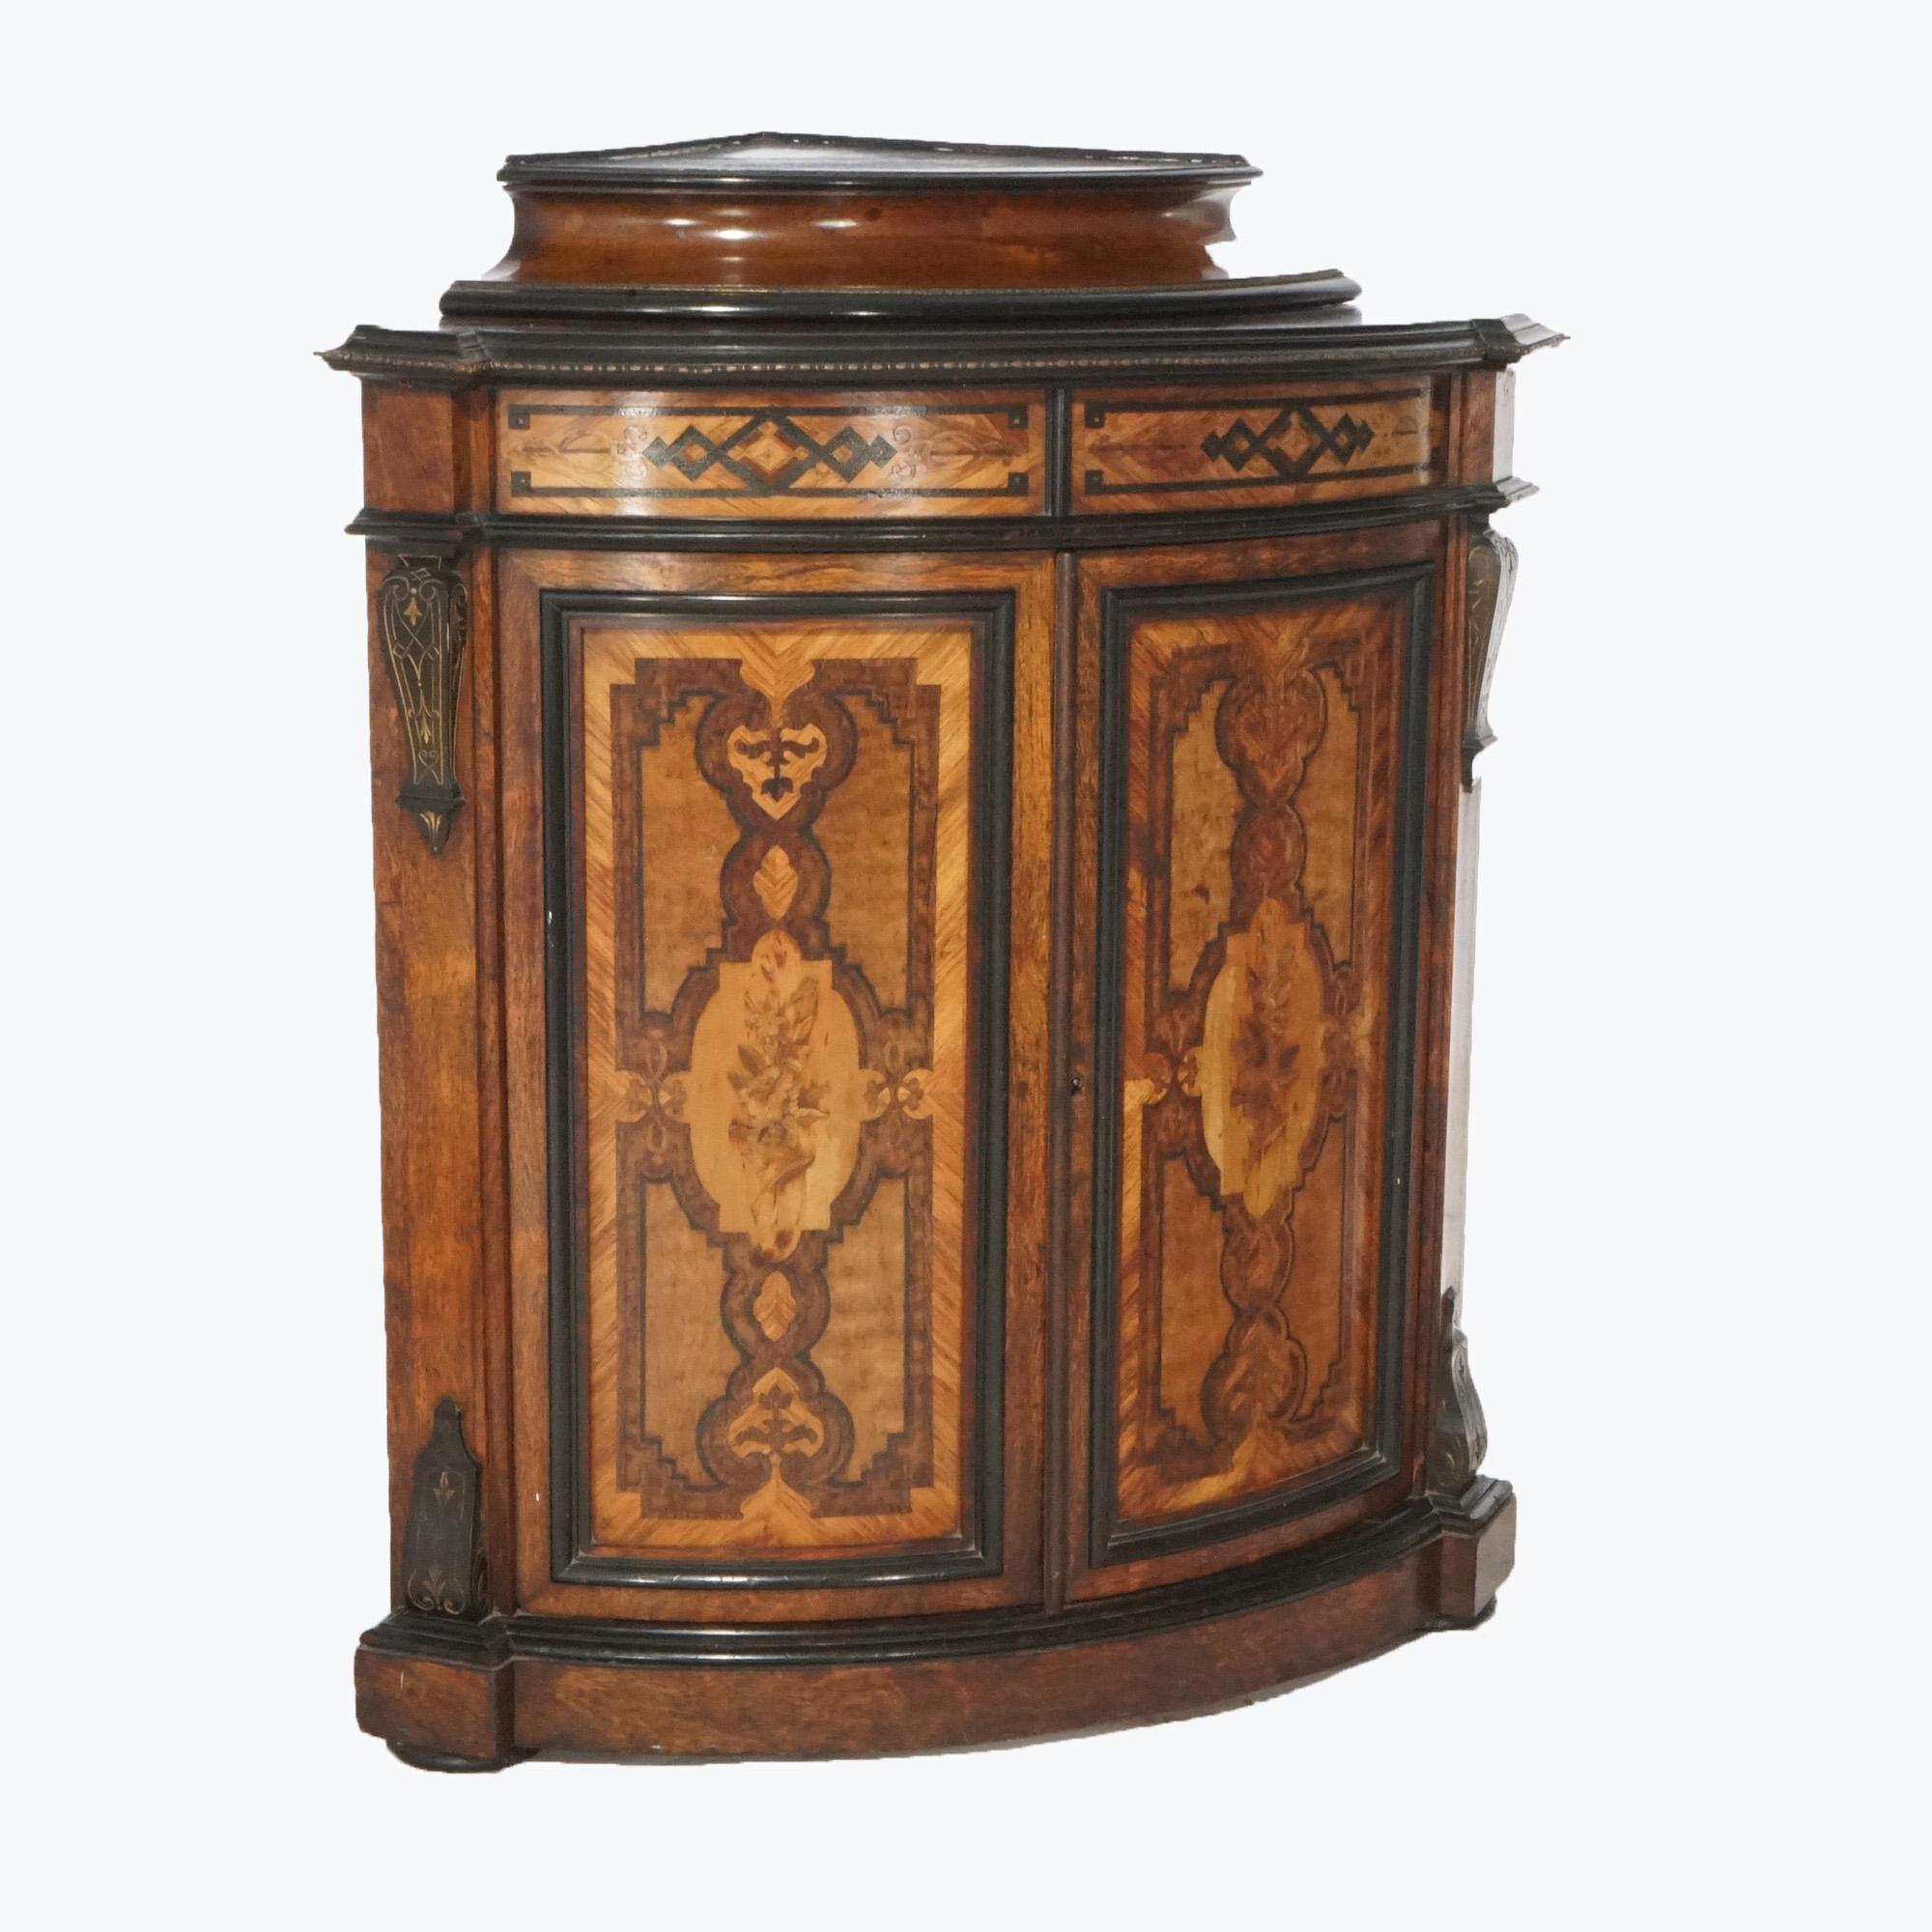 An antique Renaissance Revival Aesthetic corner cabinet offers rosewood construction with stepped display over double door case with shelved interior, marquetry decoration, and carved elements, c1880.

Measures- 43.25''H x 36''W x 25''D.